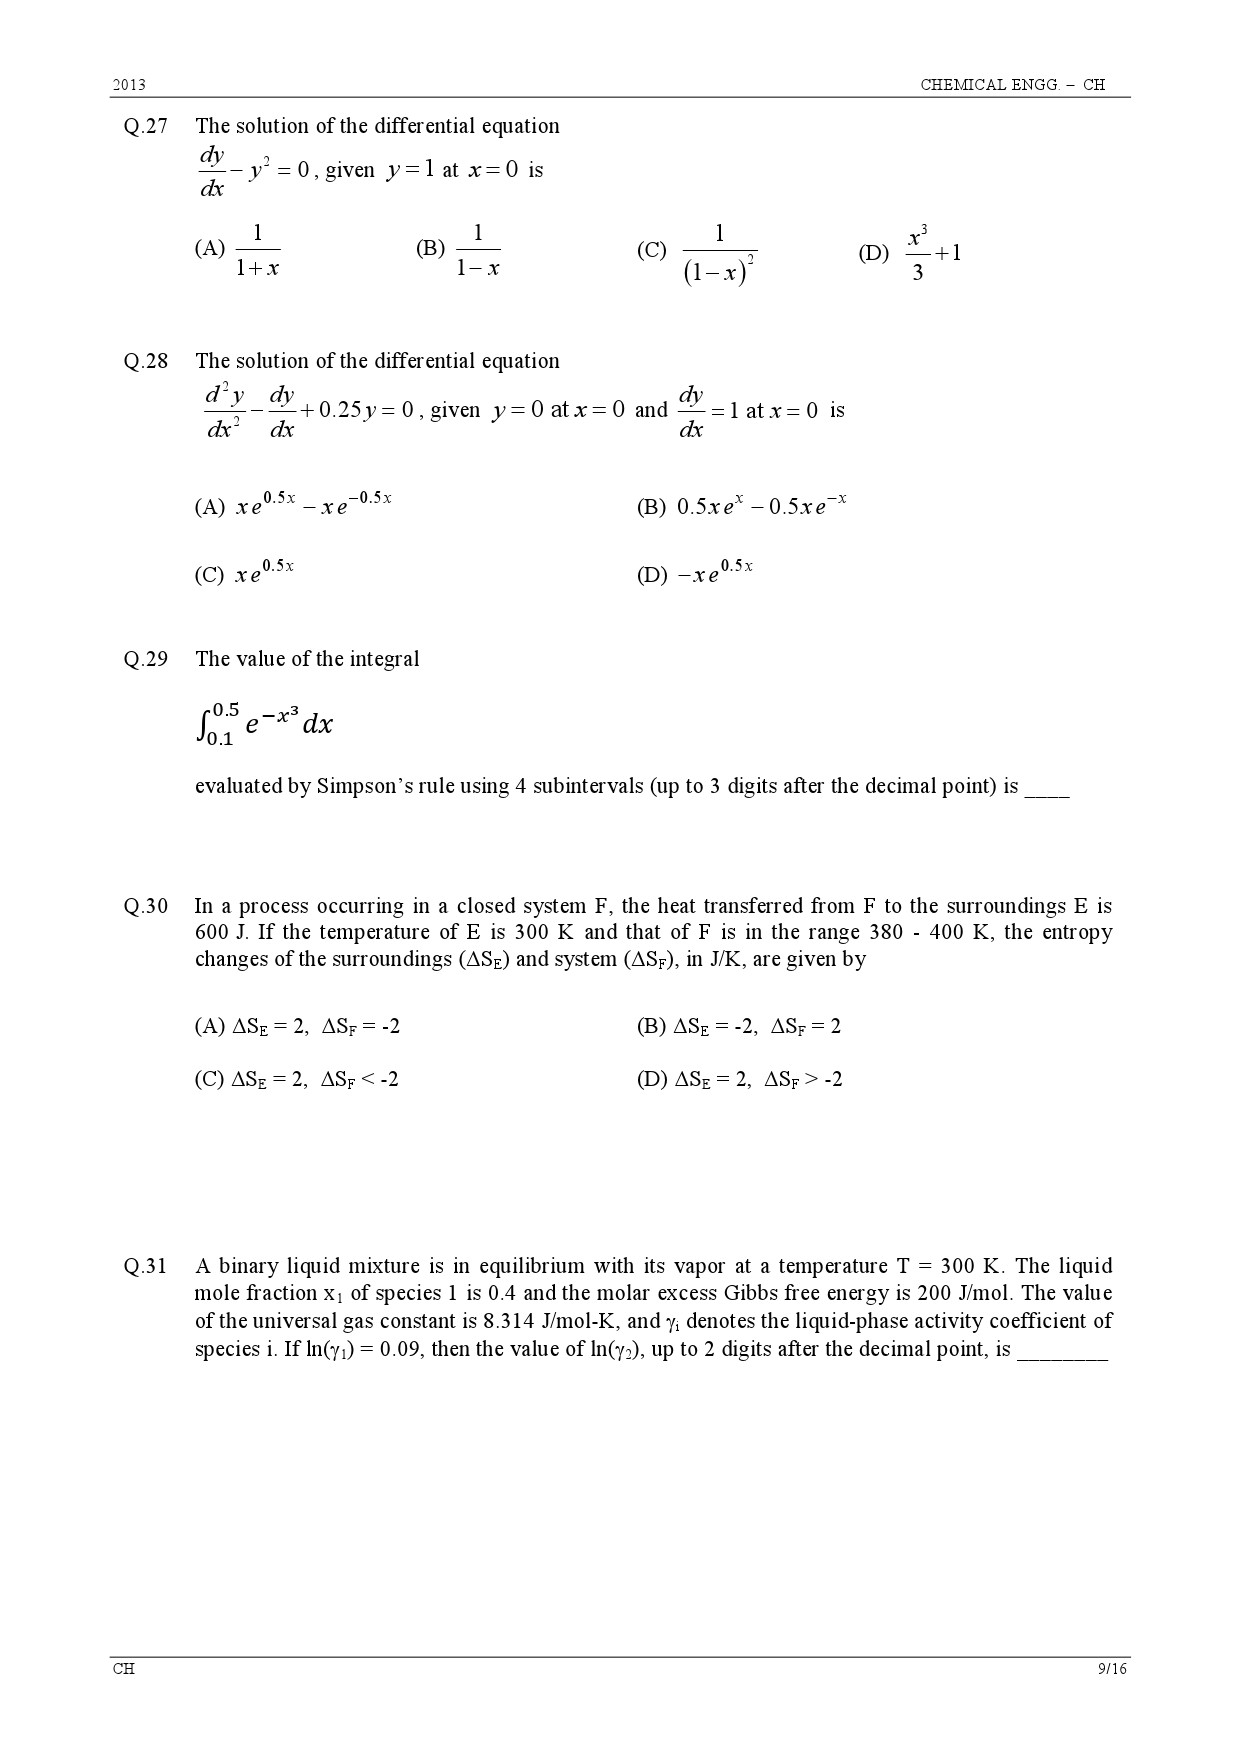 GATE Exam Question Paper 2013 Chemical Engineering 9